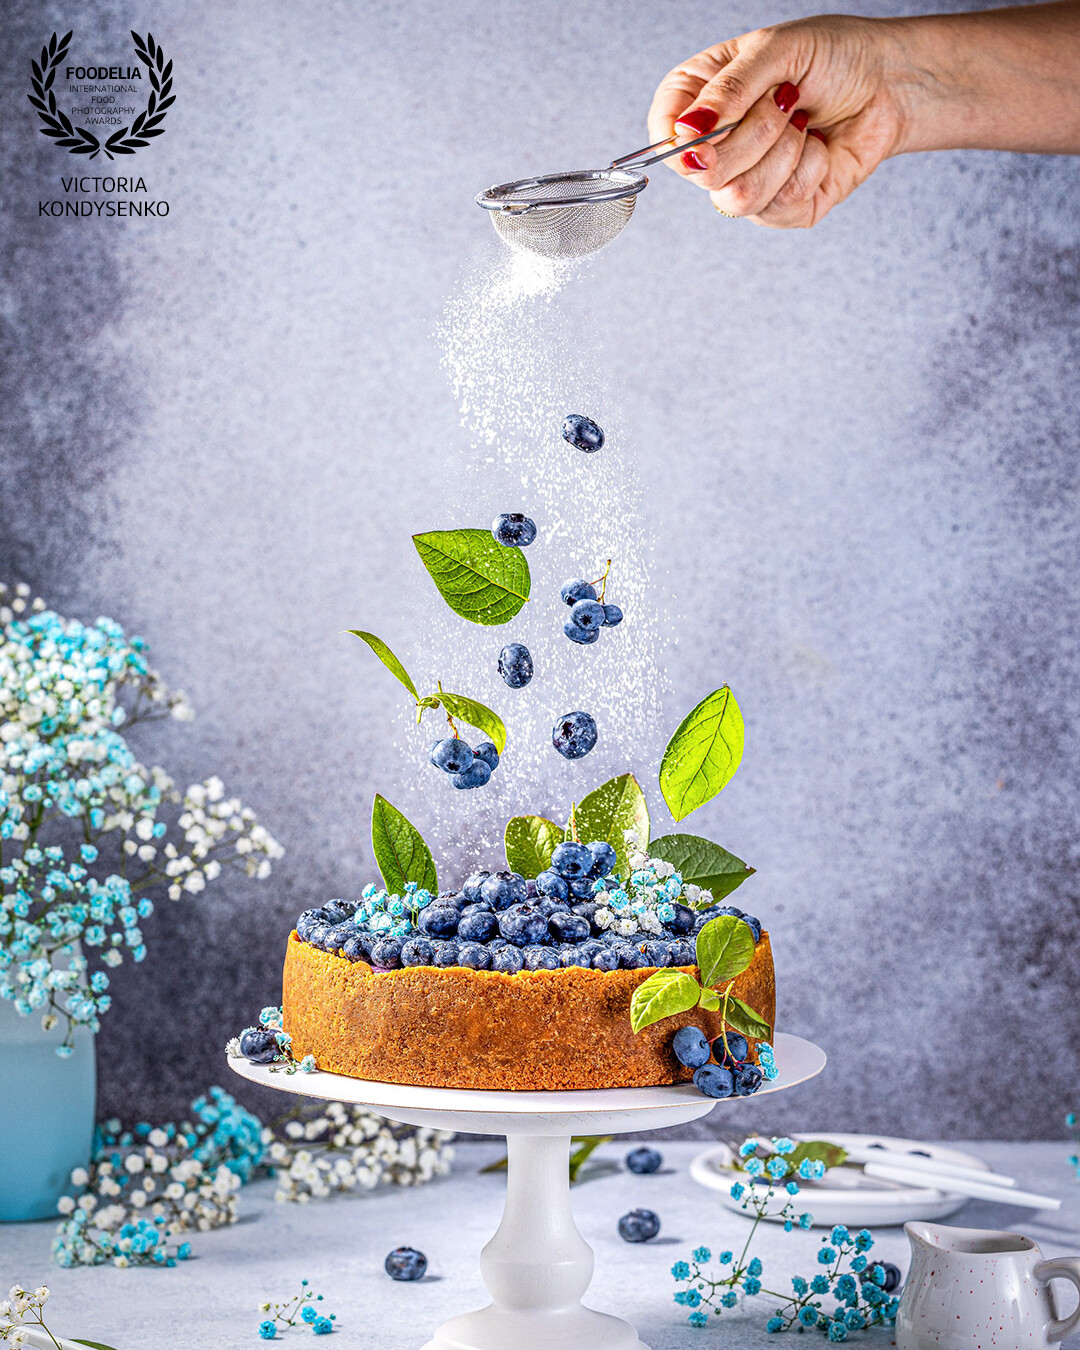 Sweet creamy blueberry cheesecake with fresh blueberries and whipped cream. Shooting for pâtisserie, local Ukrainian business.